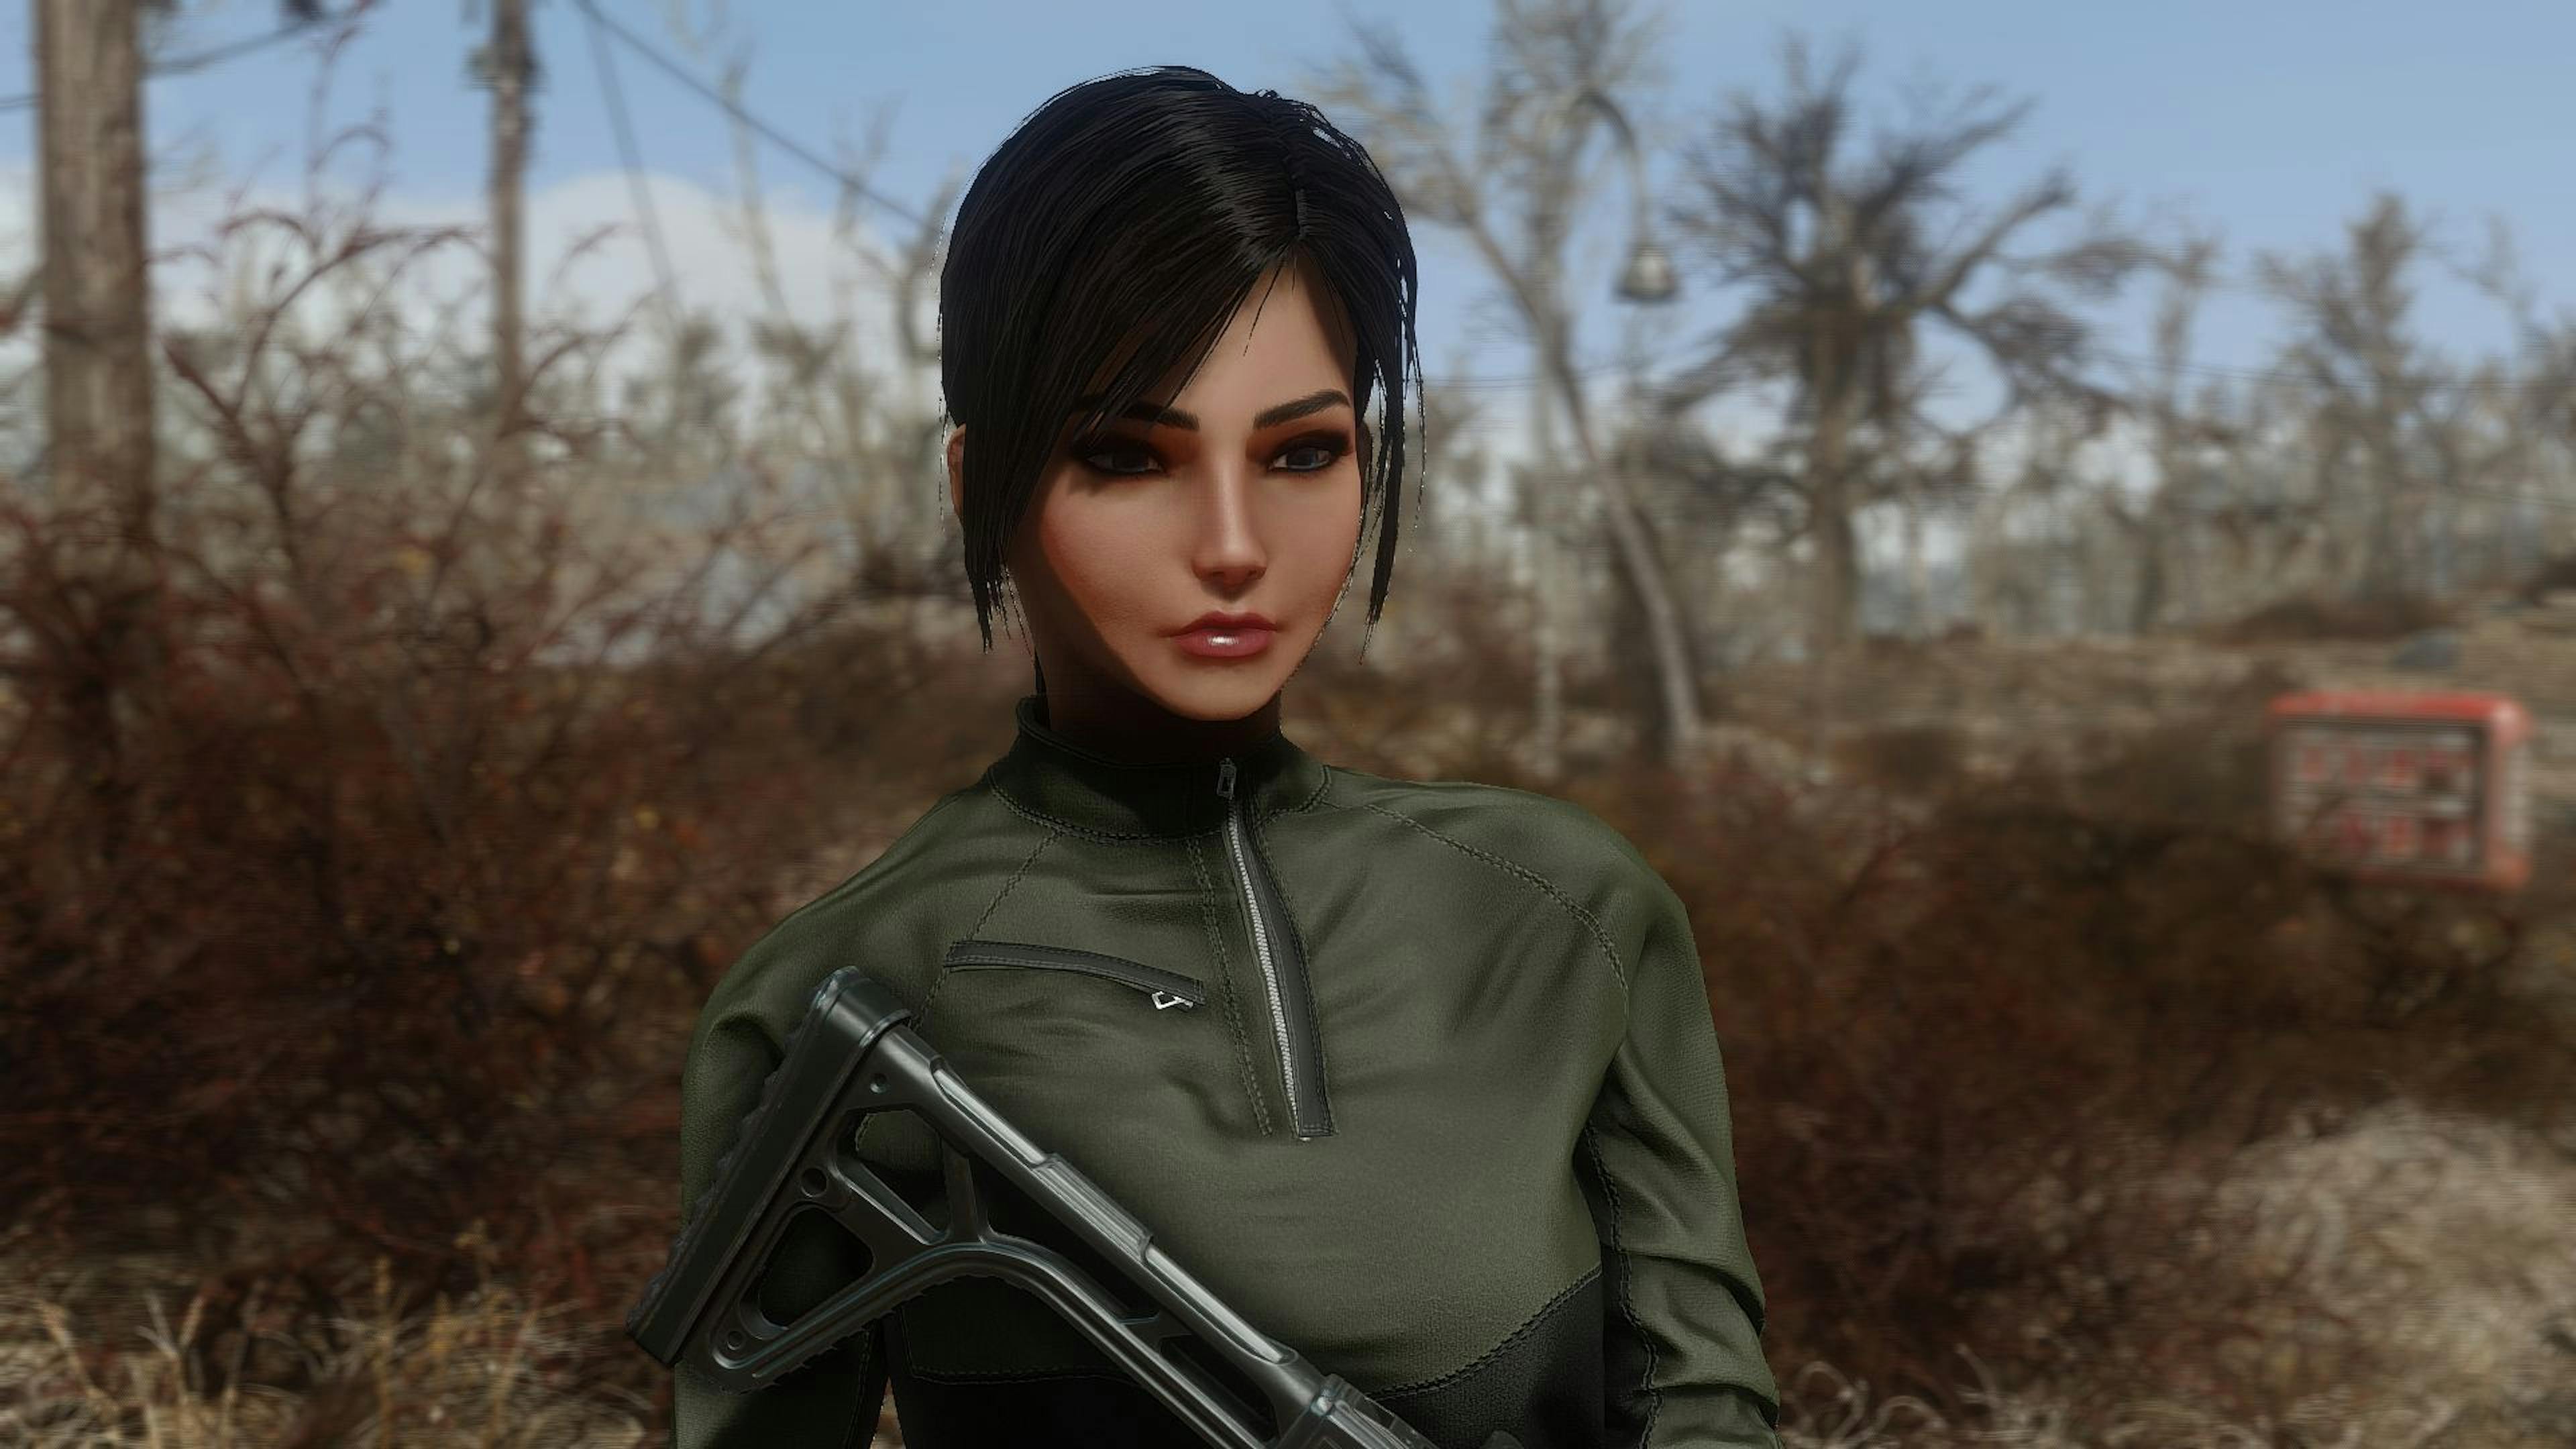 featured image - 7 Best Fallout 4 Body Mods and Face Mods